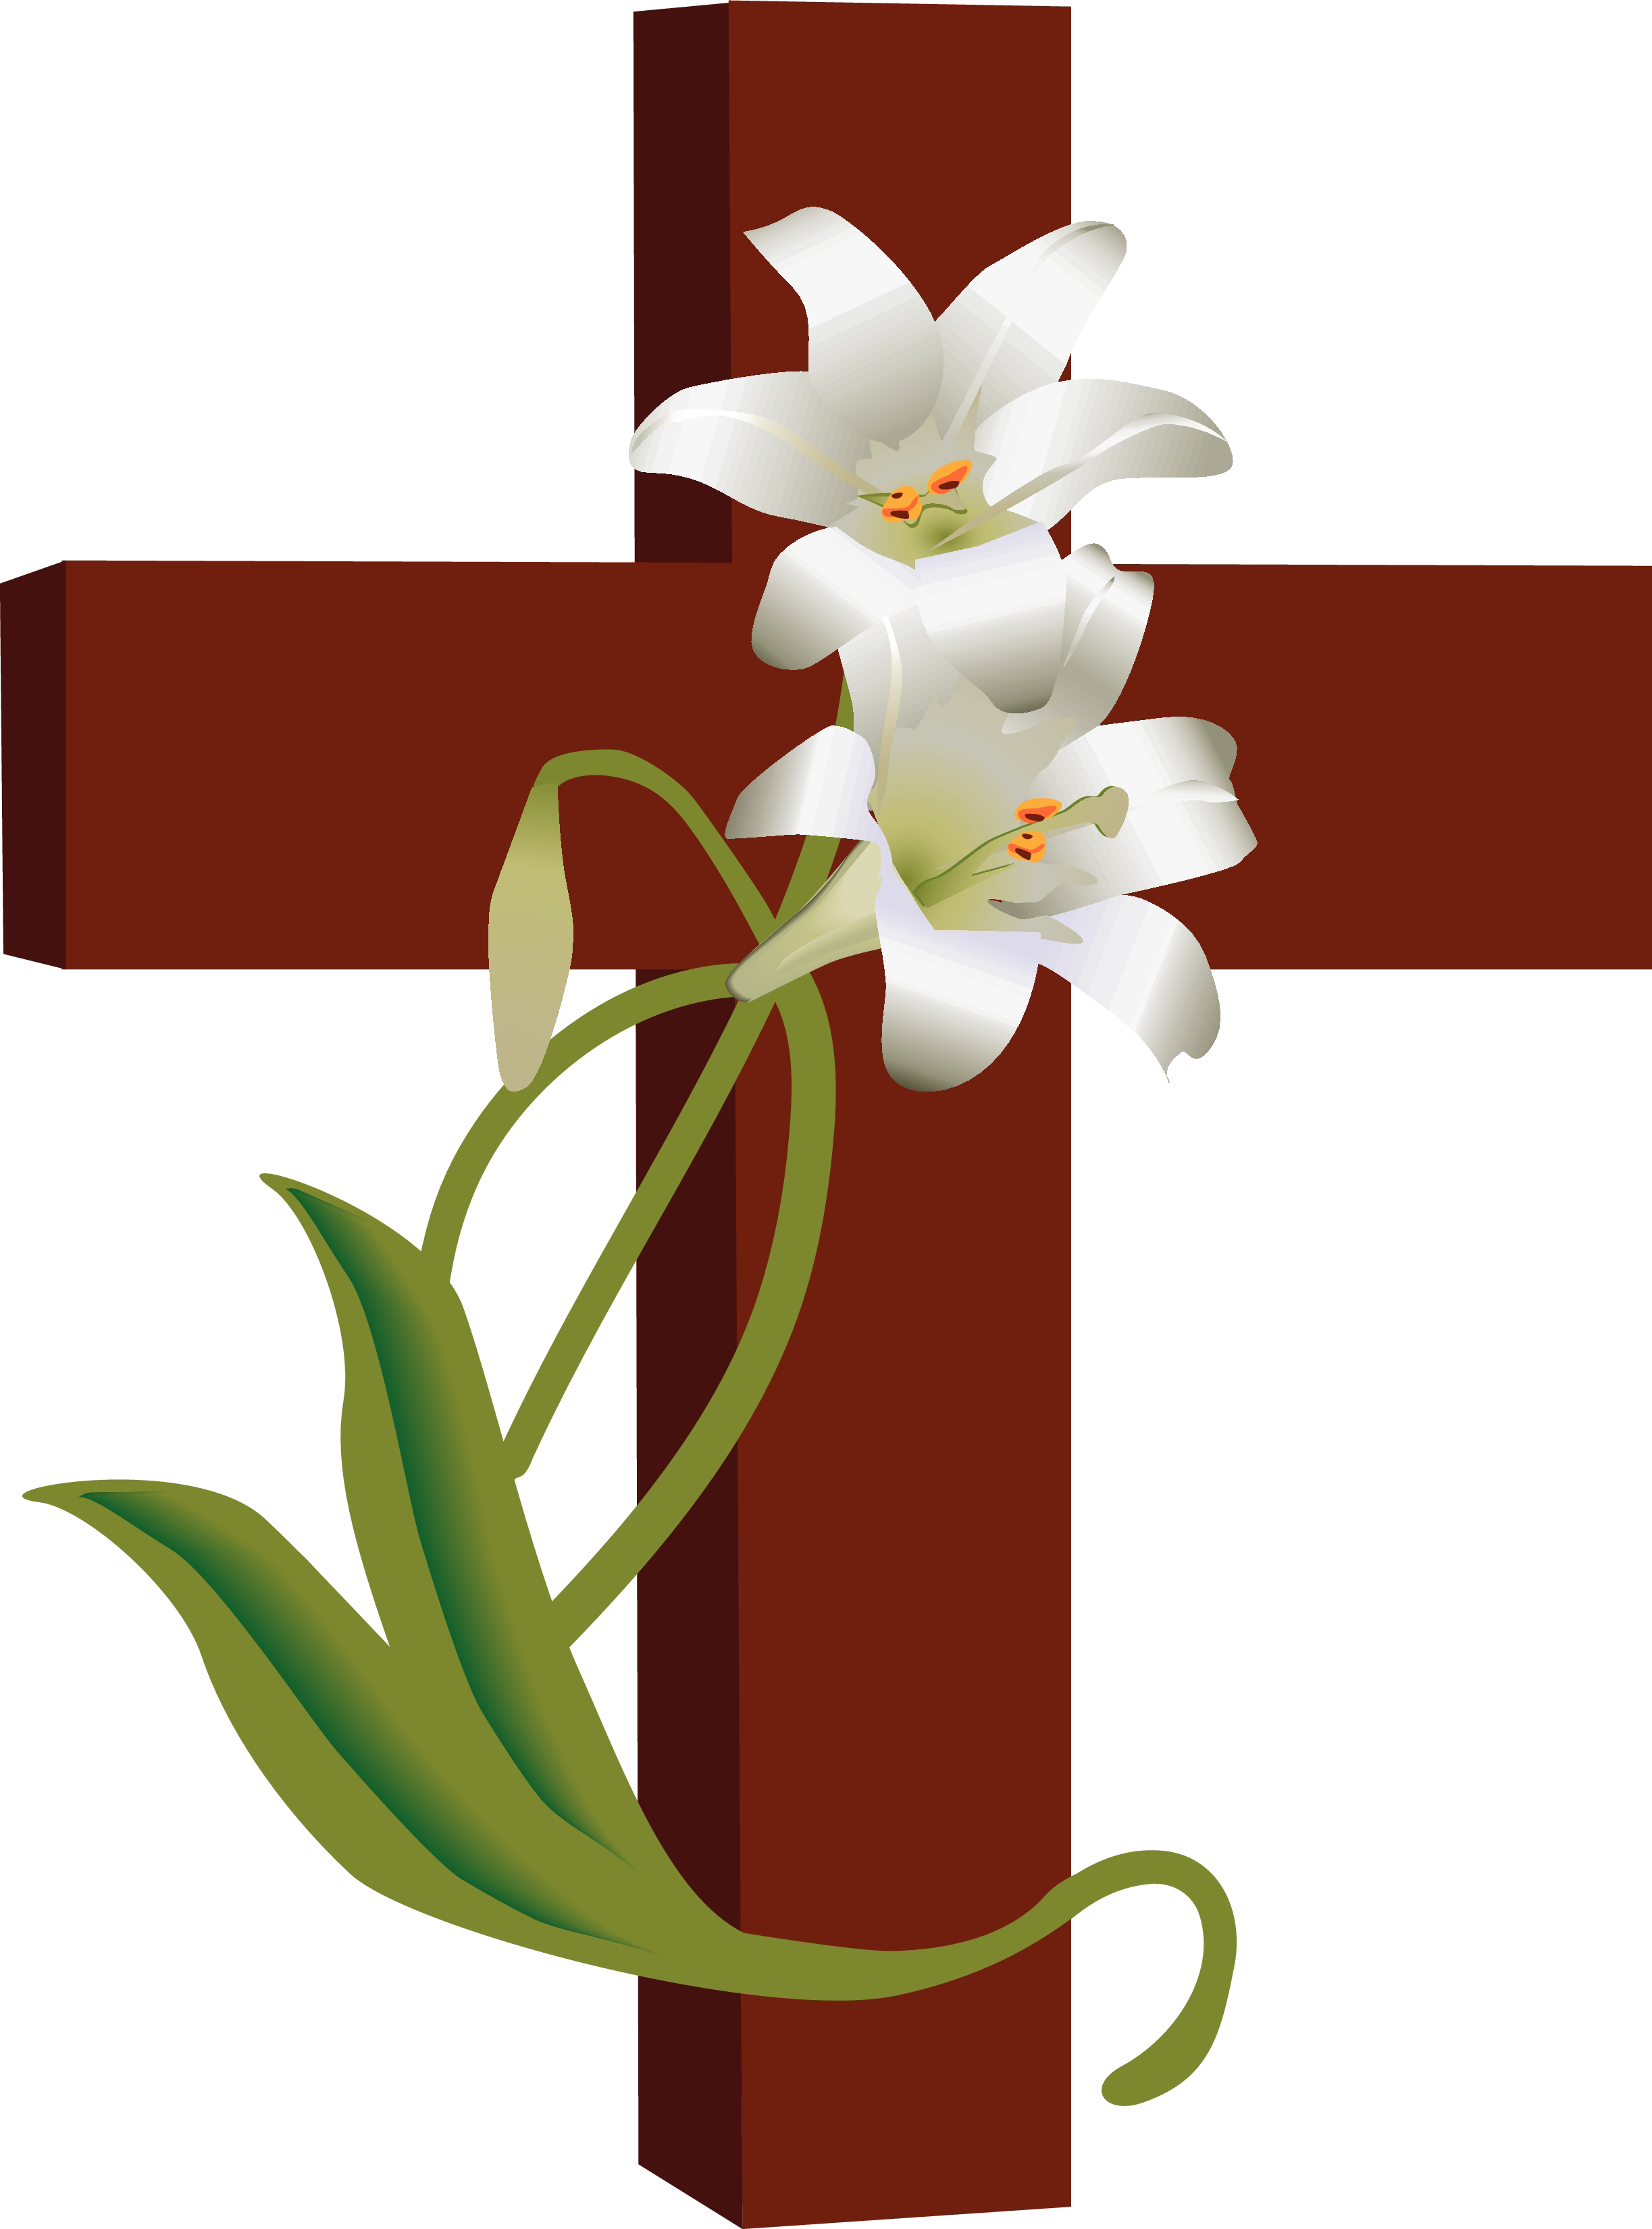 Good Friday ฟรีภาพ PNG PNG All